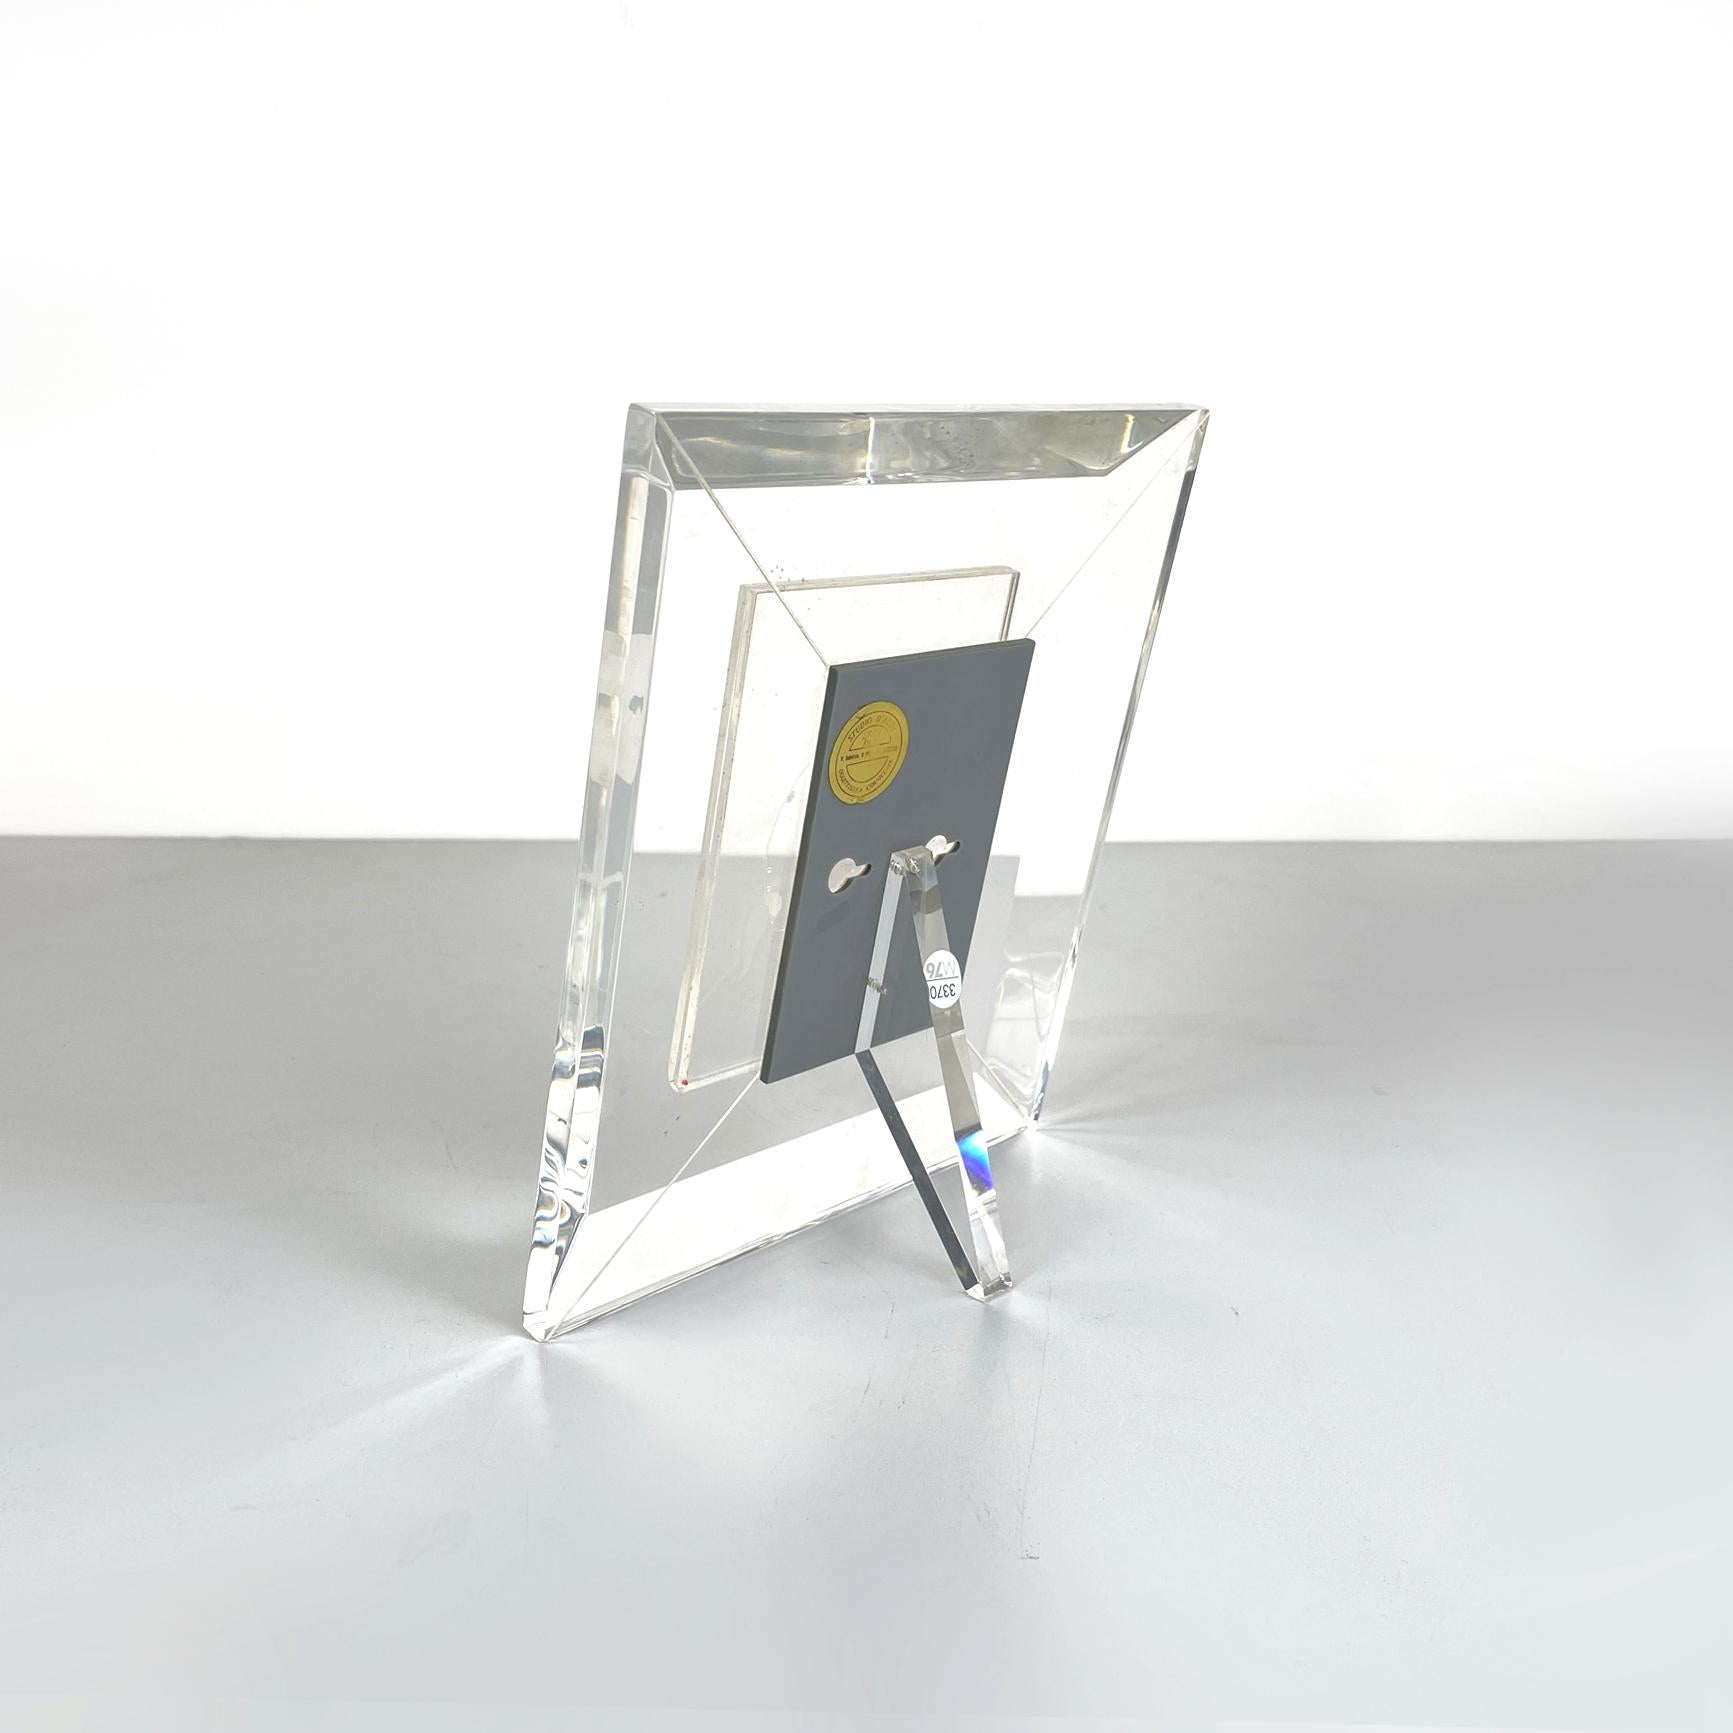 Late 20th Century Italian Modern Table Photo Frame in Transparent Plexiglass, 1970s For Sale